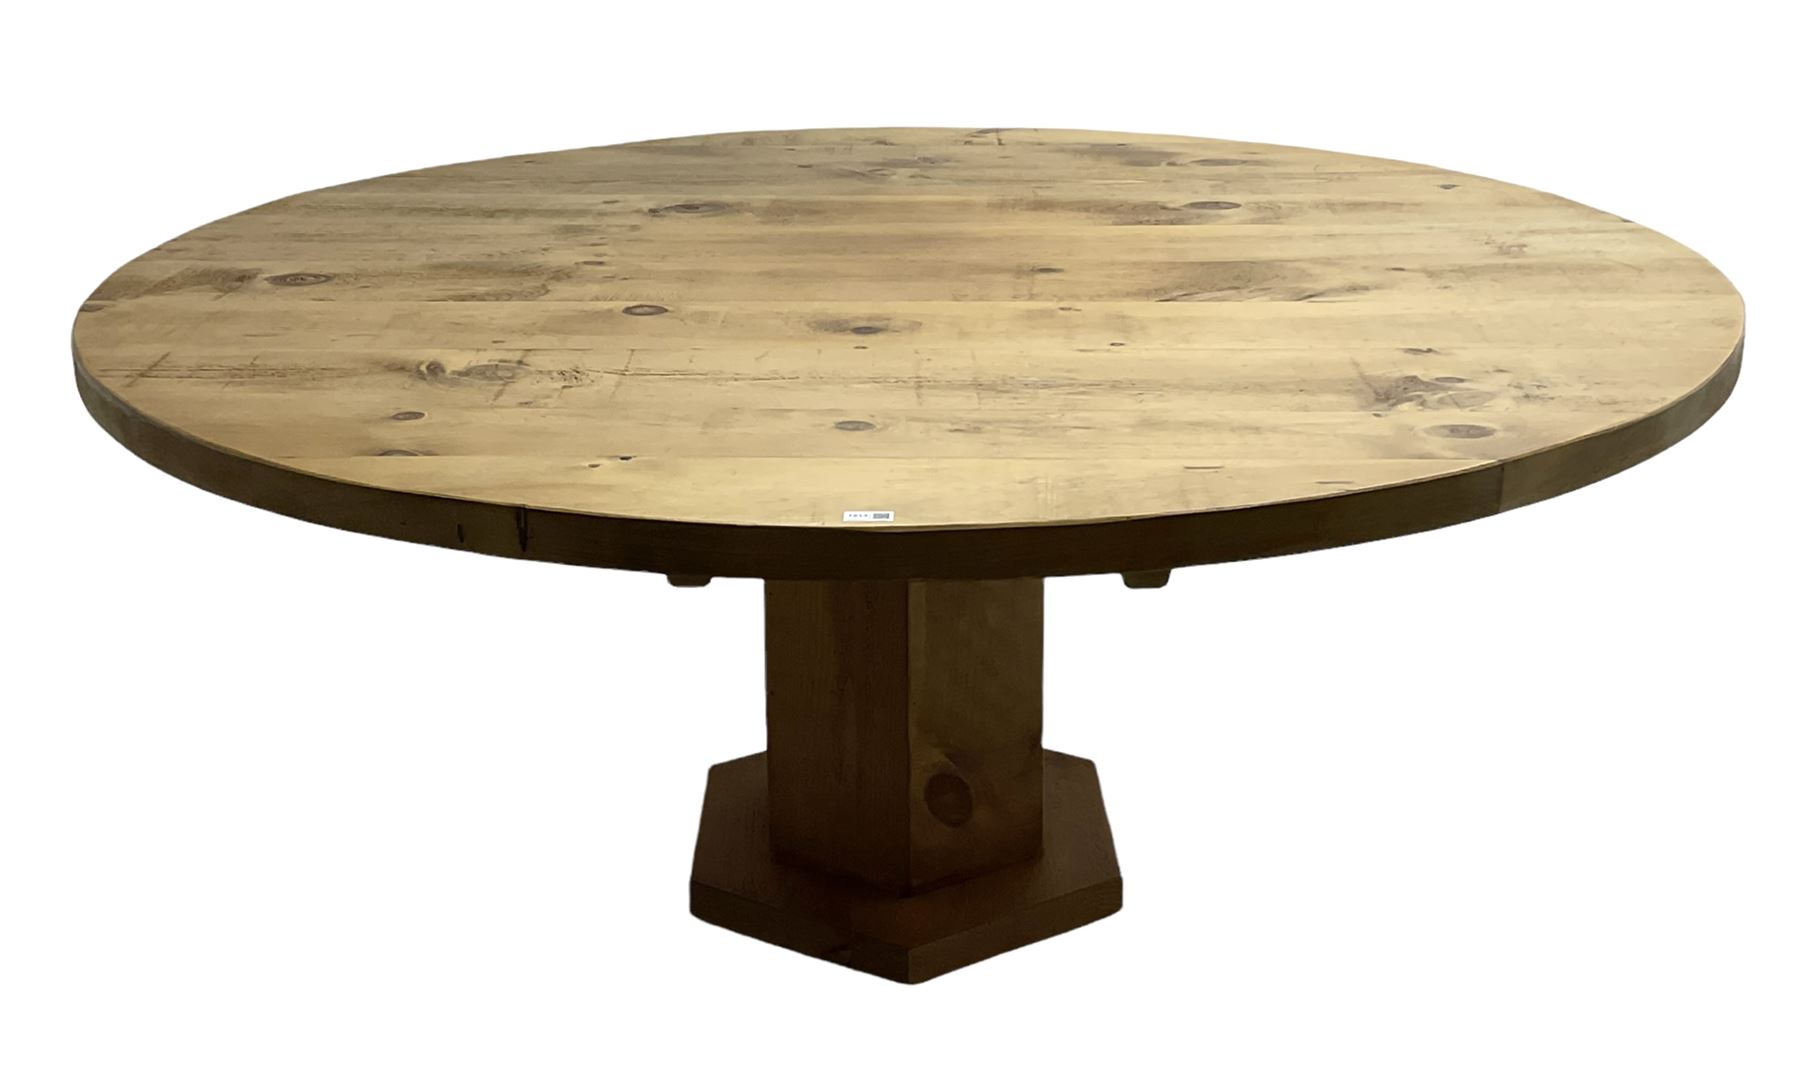 Large rustic waxed pine dining table